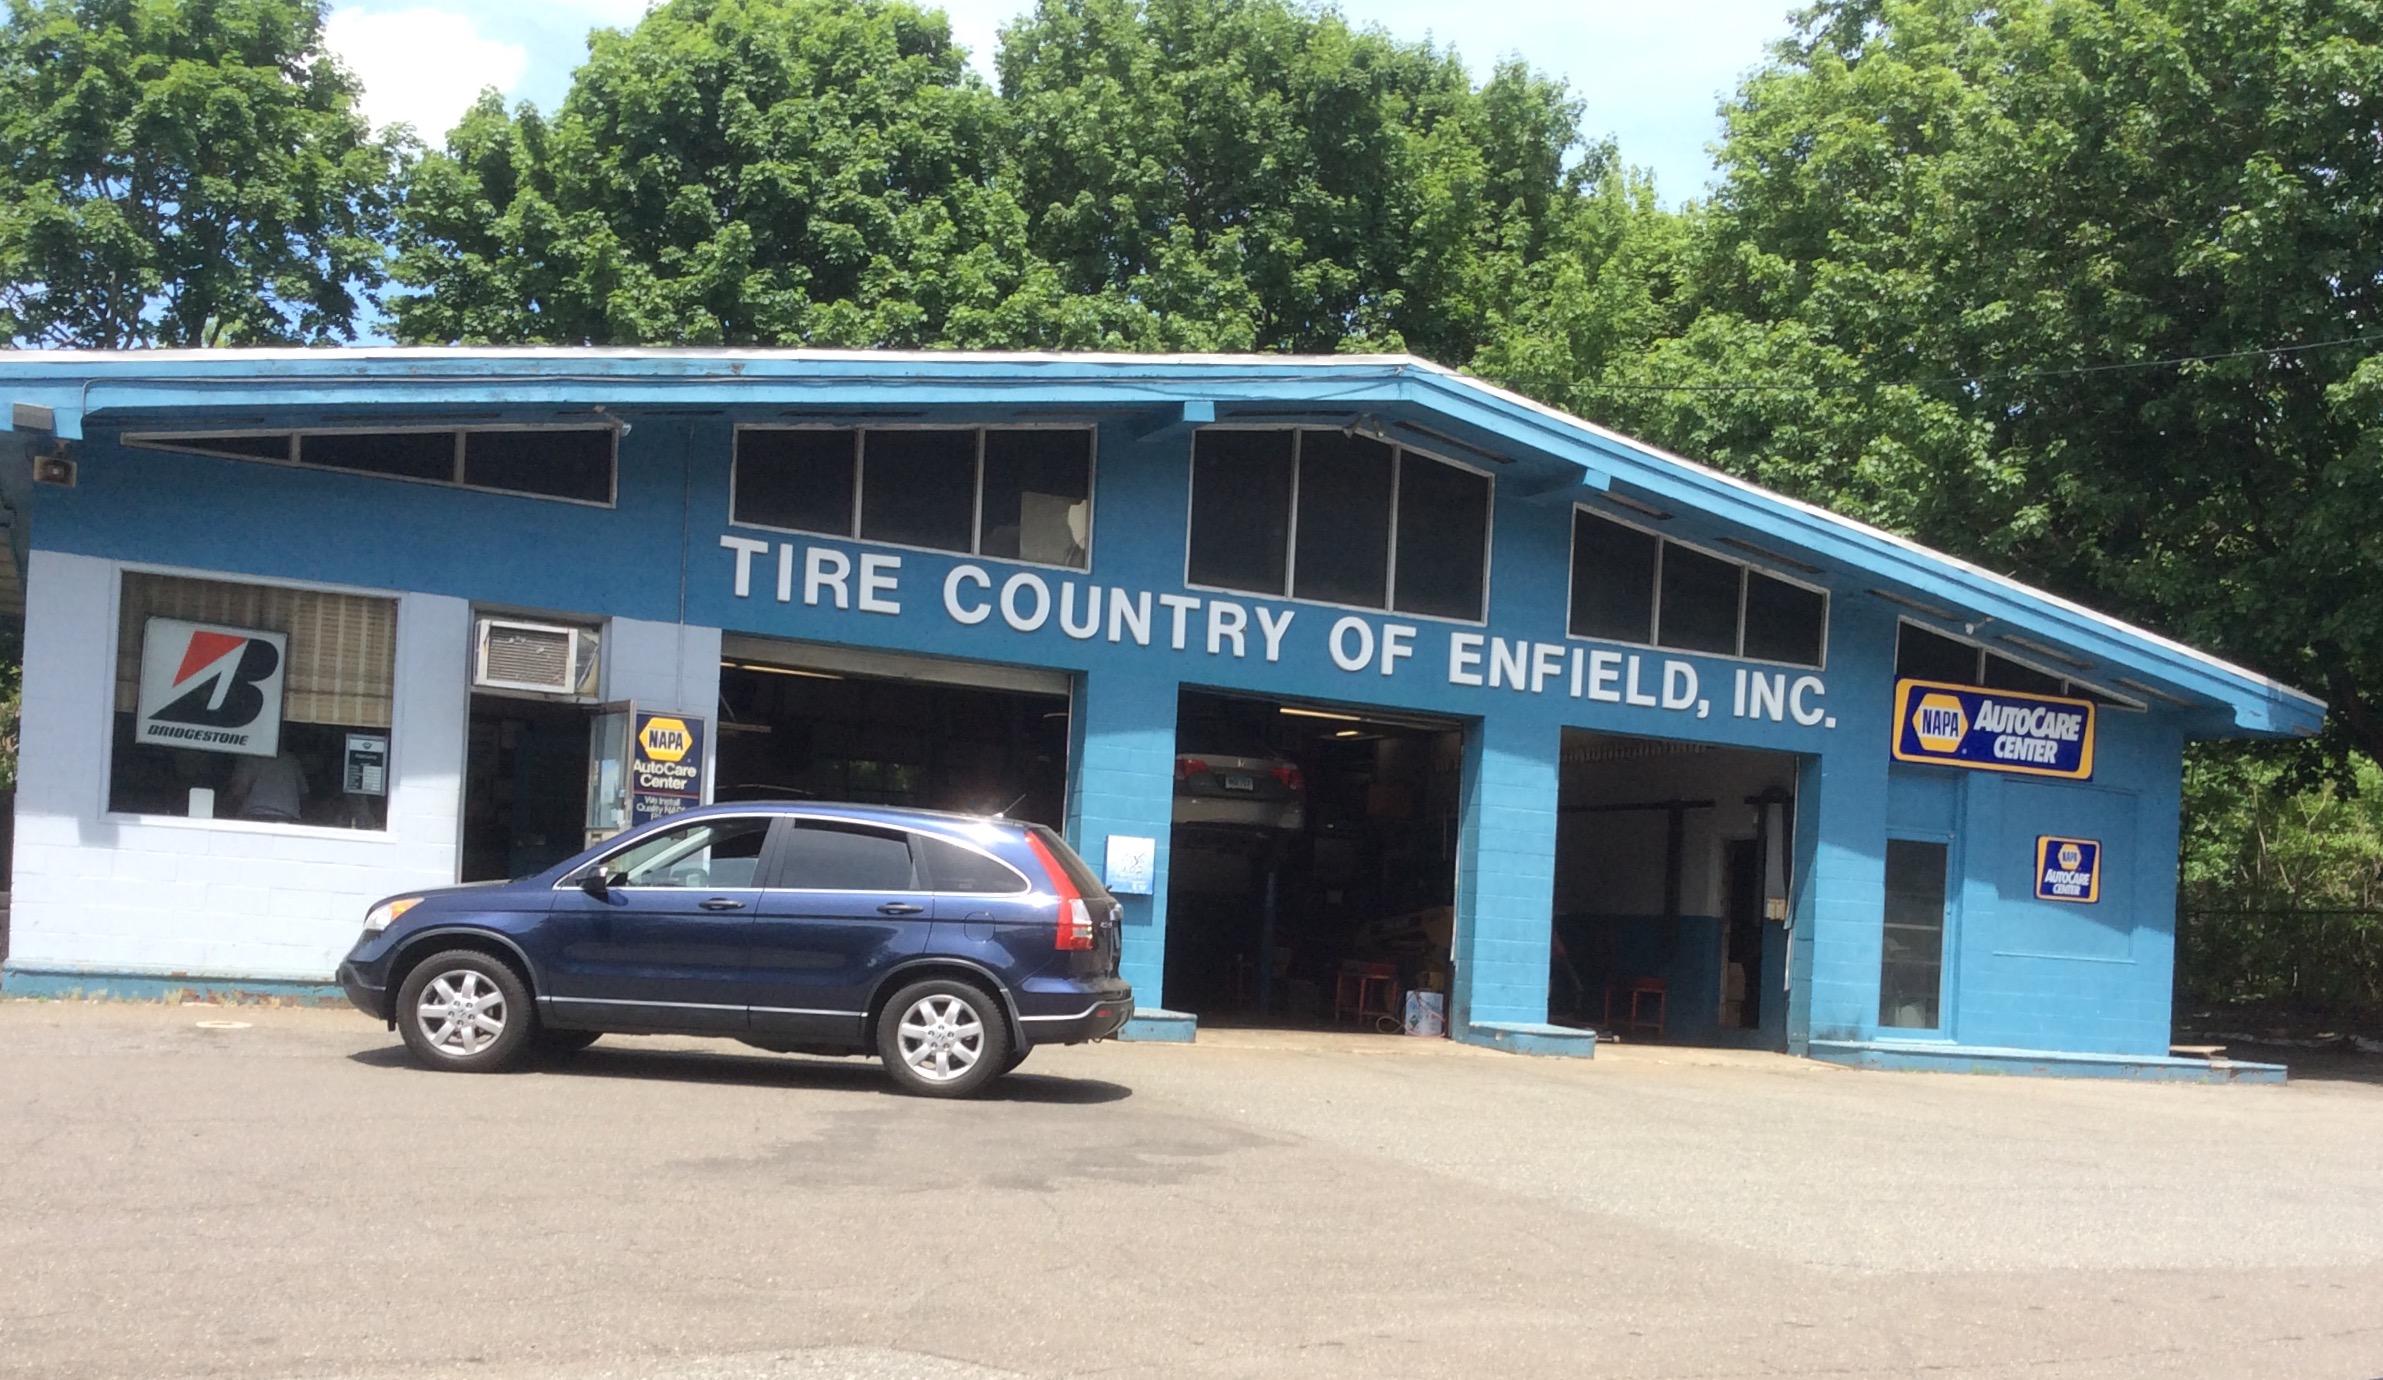 Tire Country of Enfield viewed from the front.